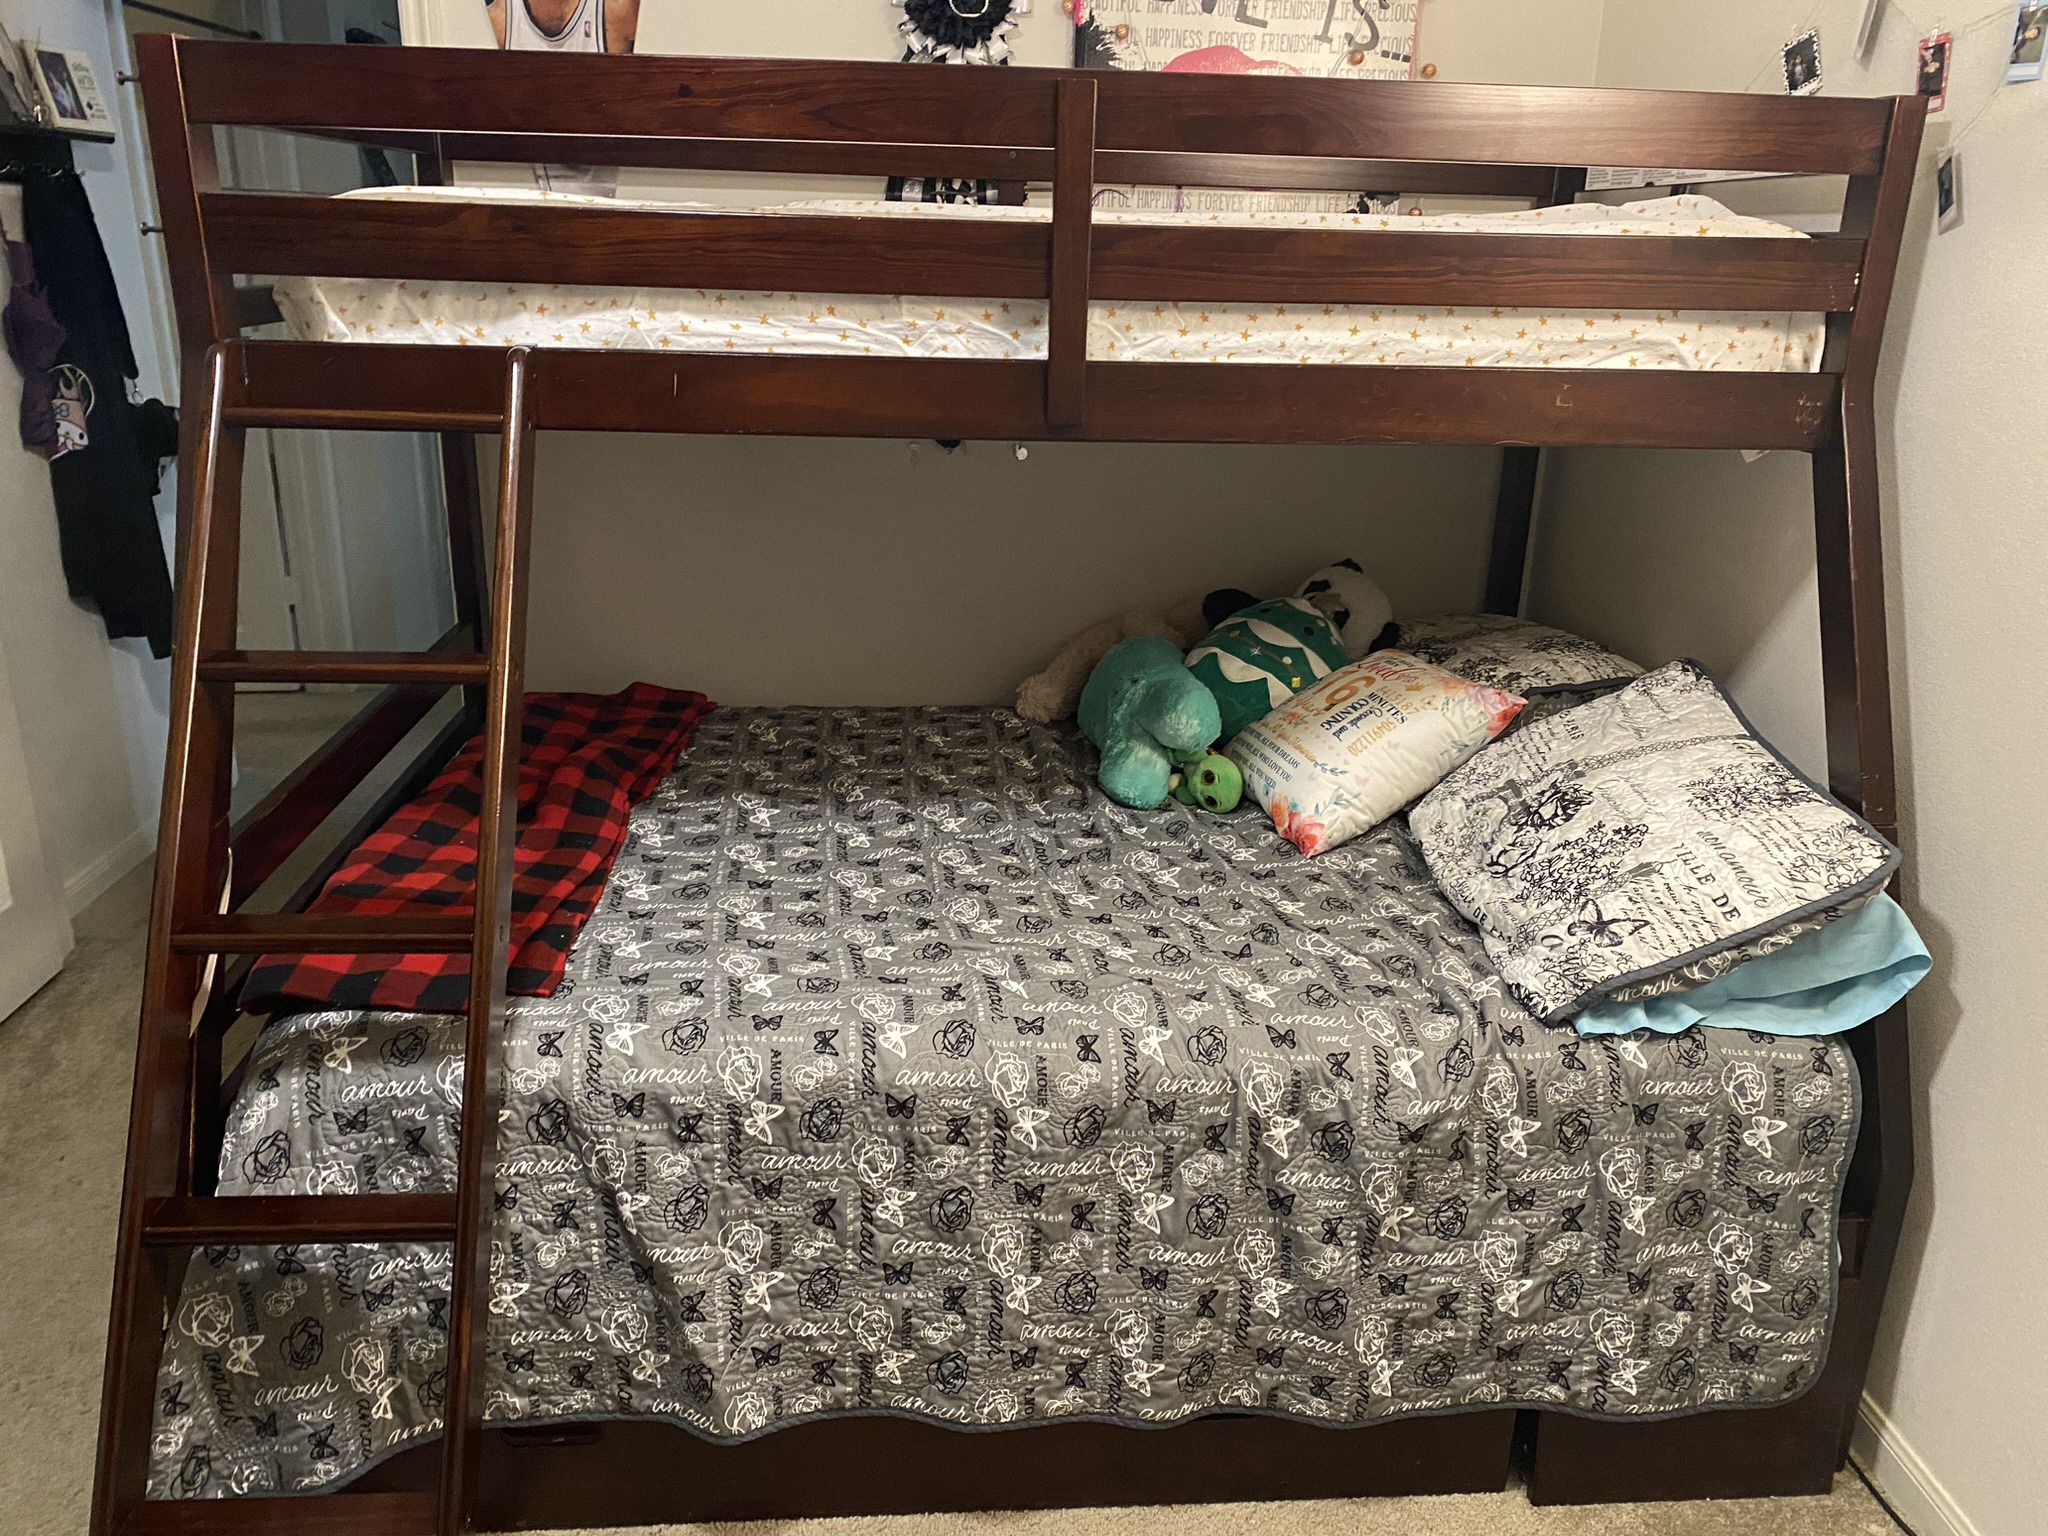 Bunk Bed Full/Twin